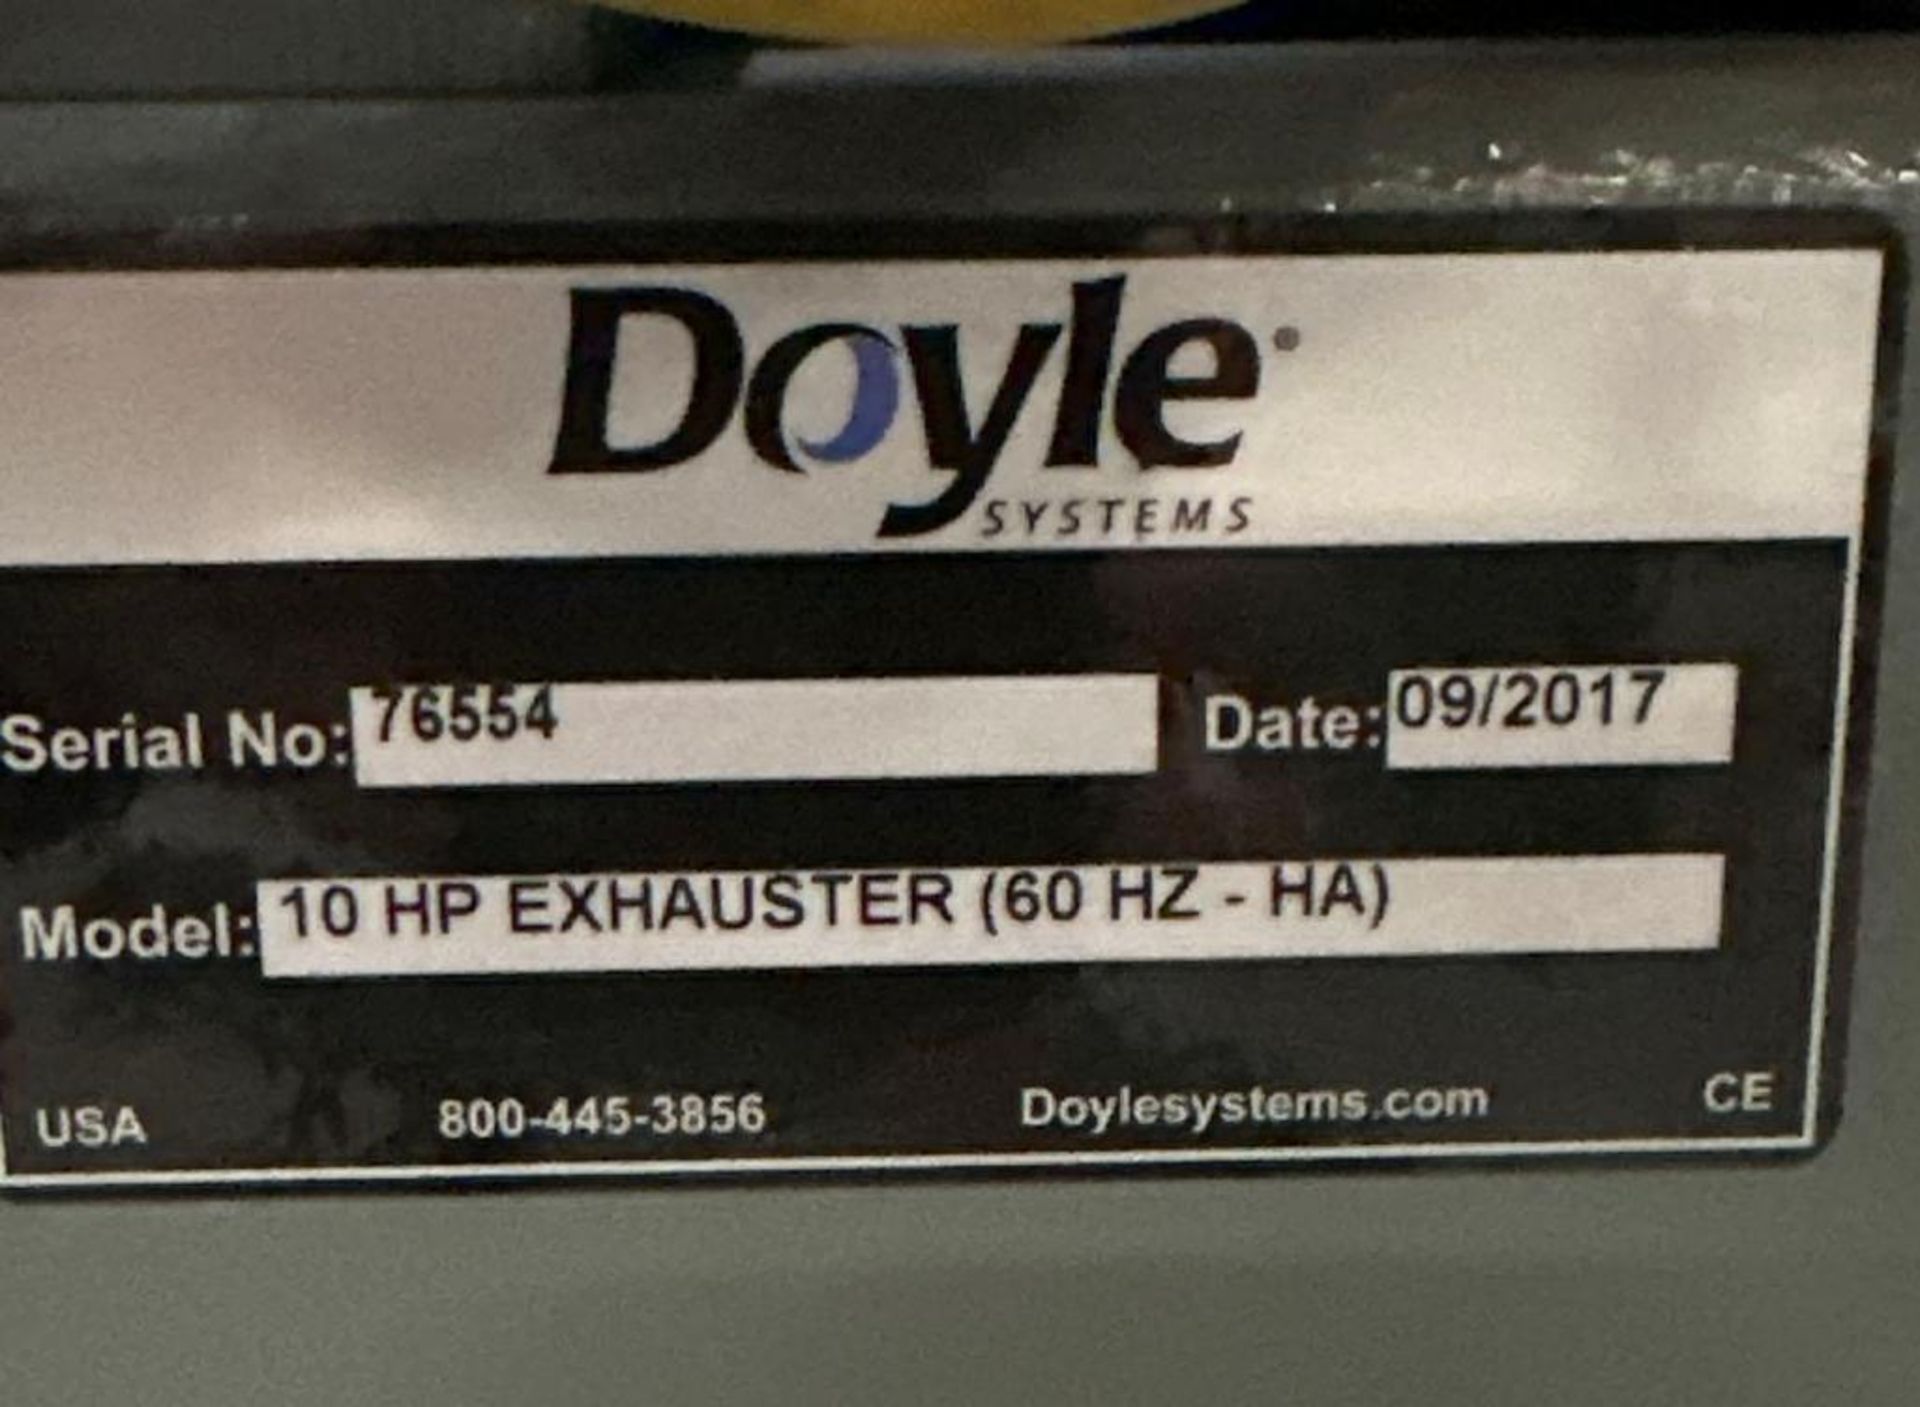 Doyle 2-Cartridge Dust Collector - Never Used (2017) - Image 3 of 3